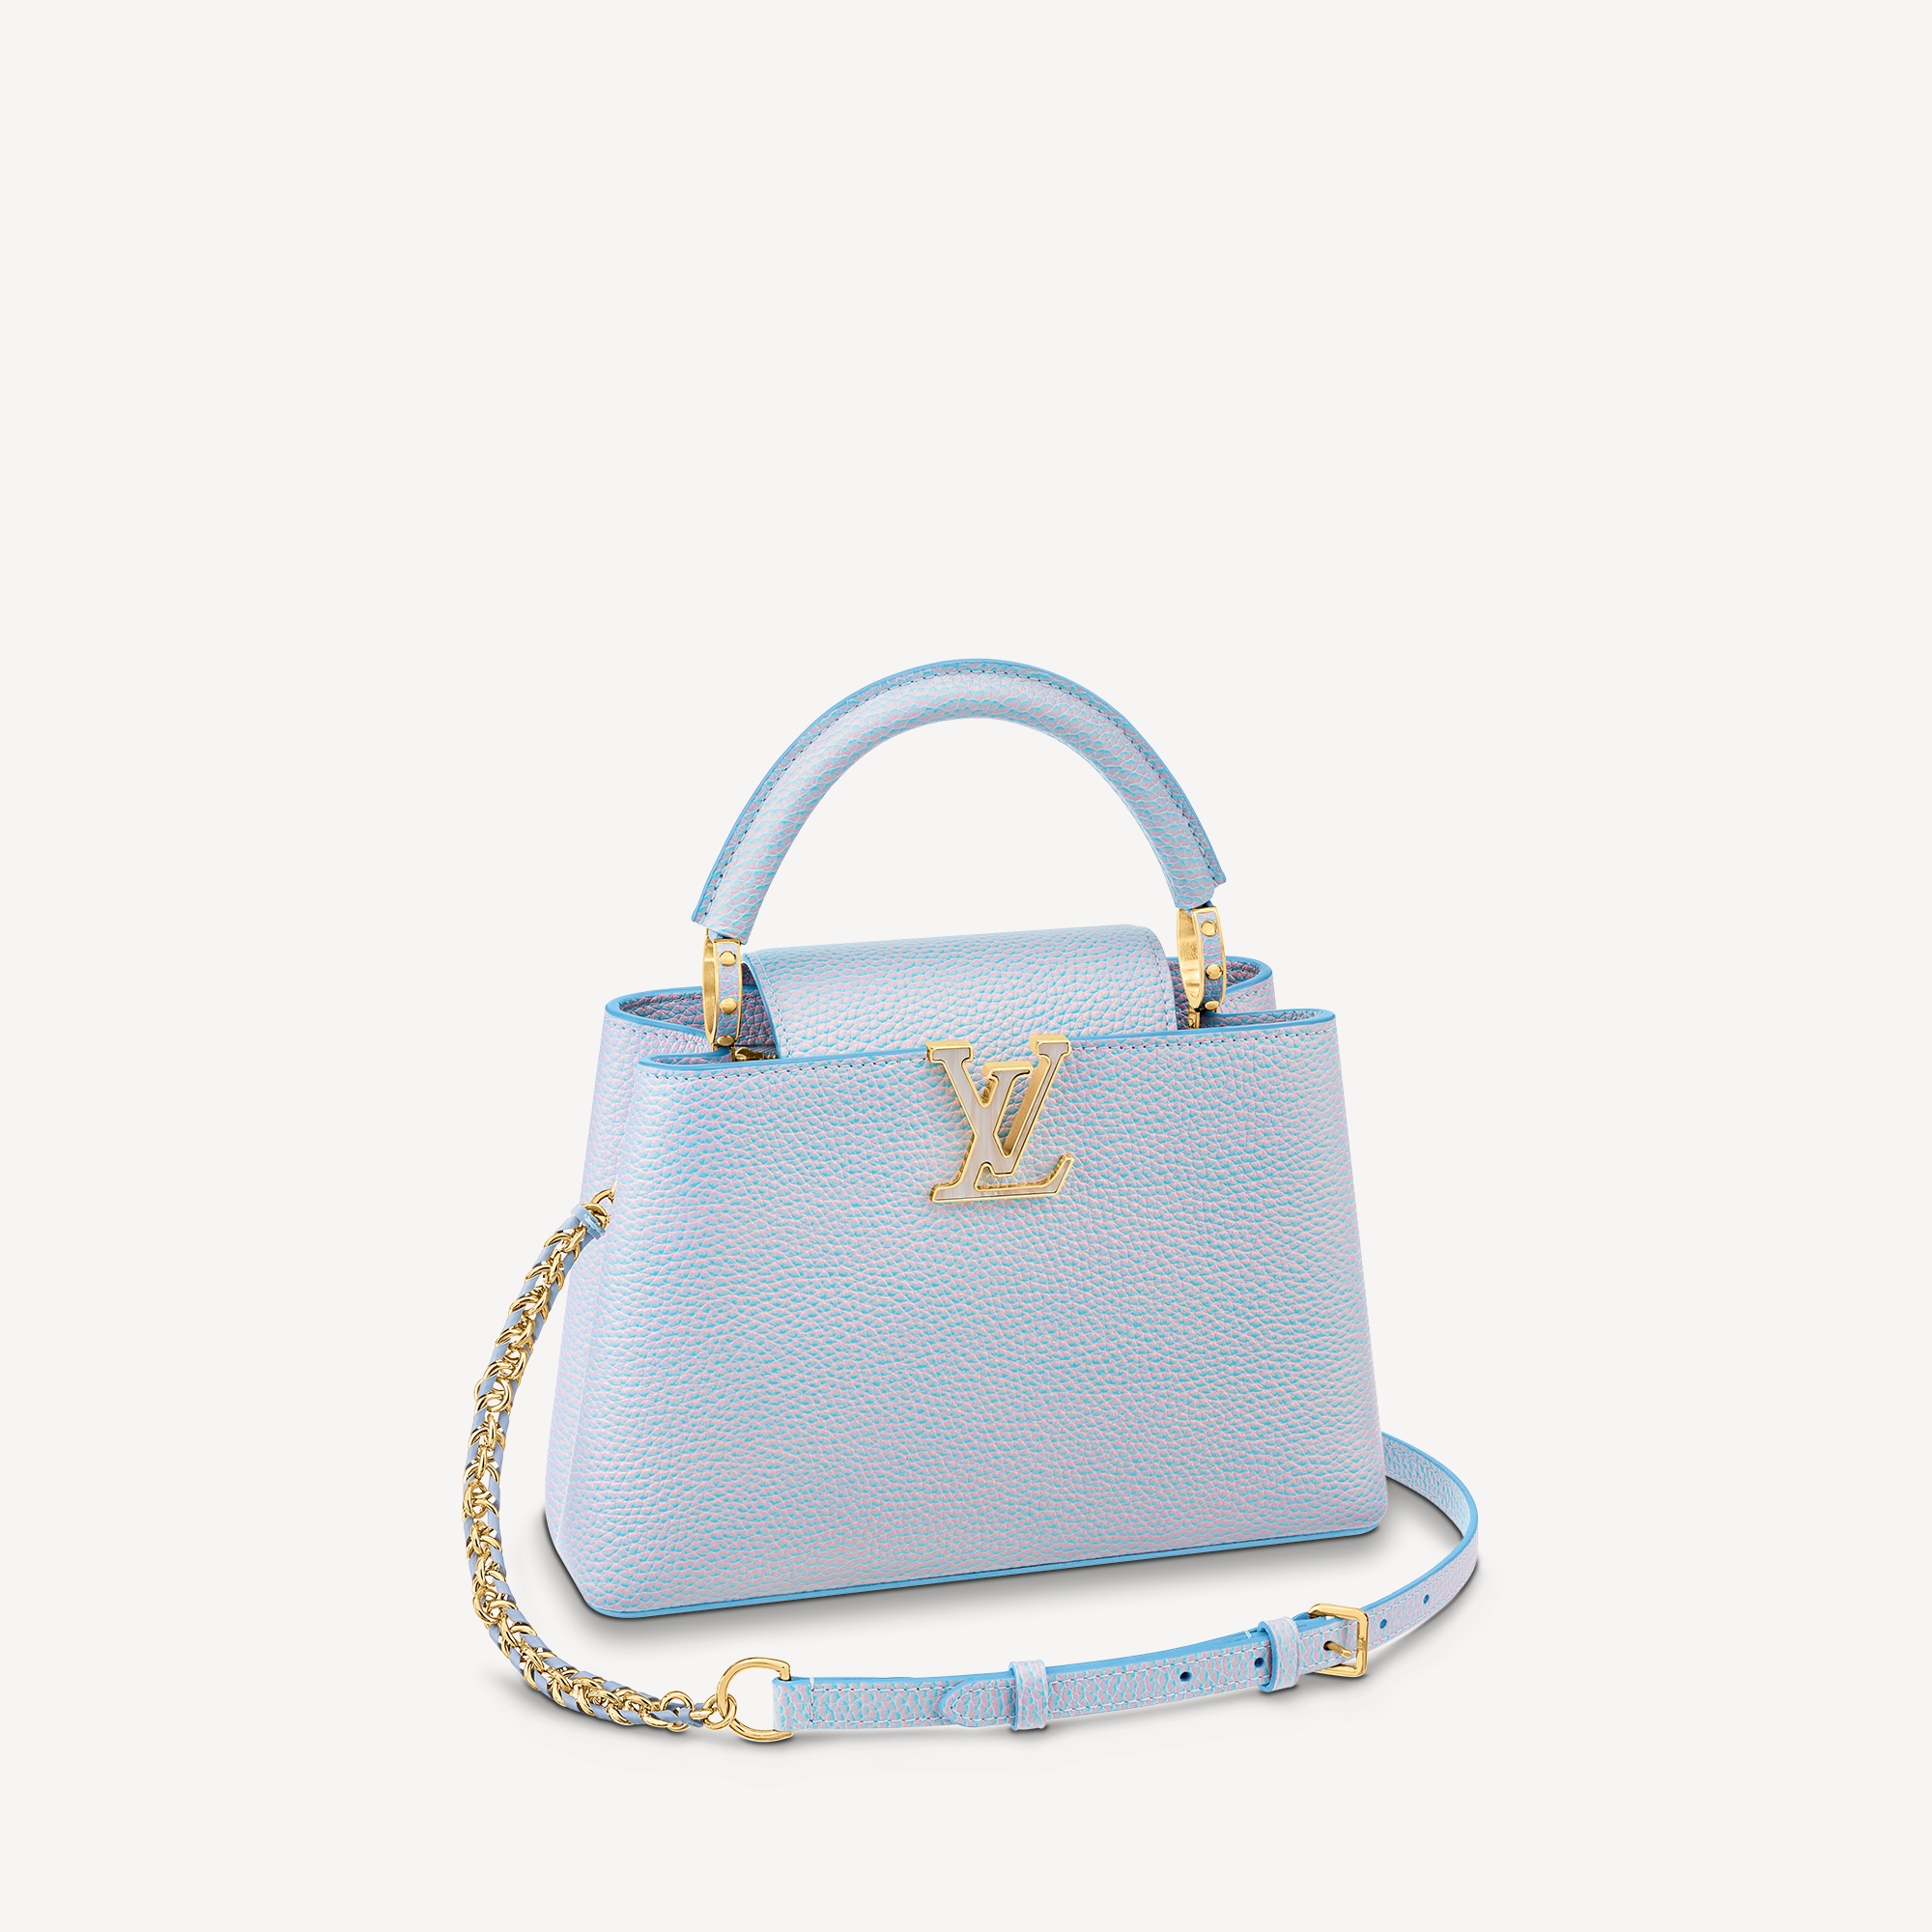 From Valentino to Prada and more—these are the best designer handbags of the month (фото 4)